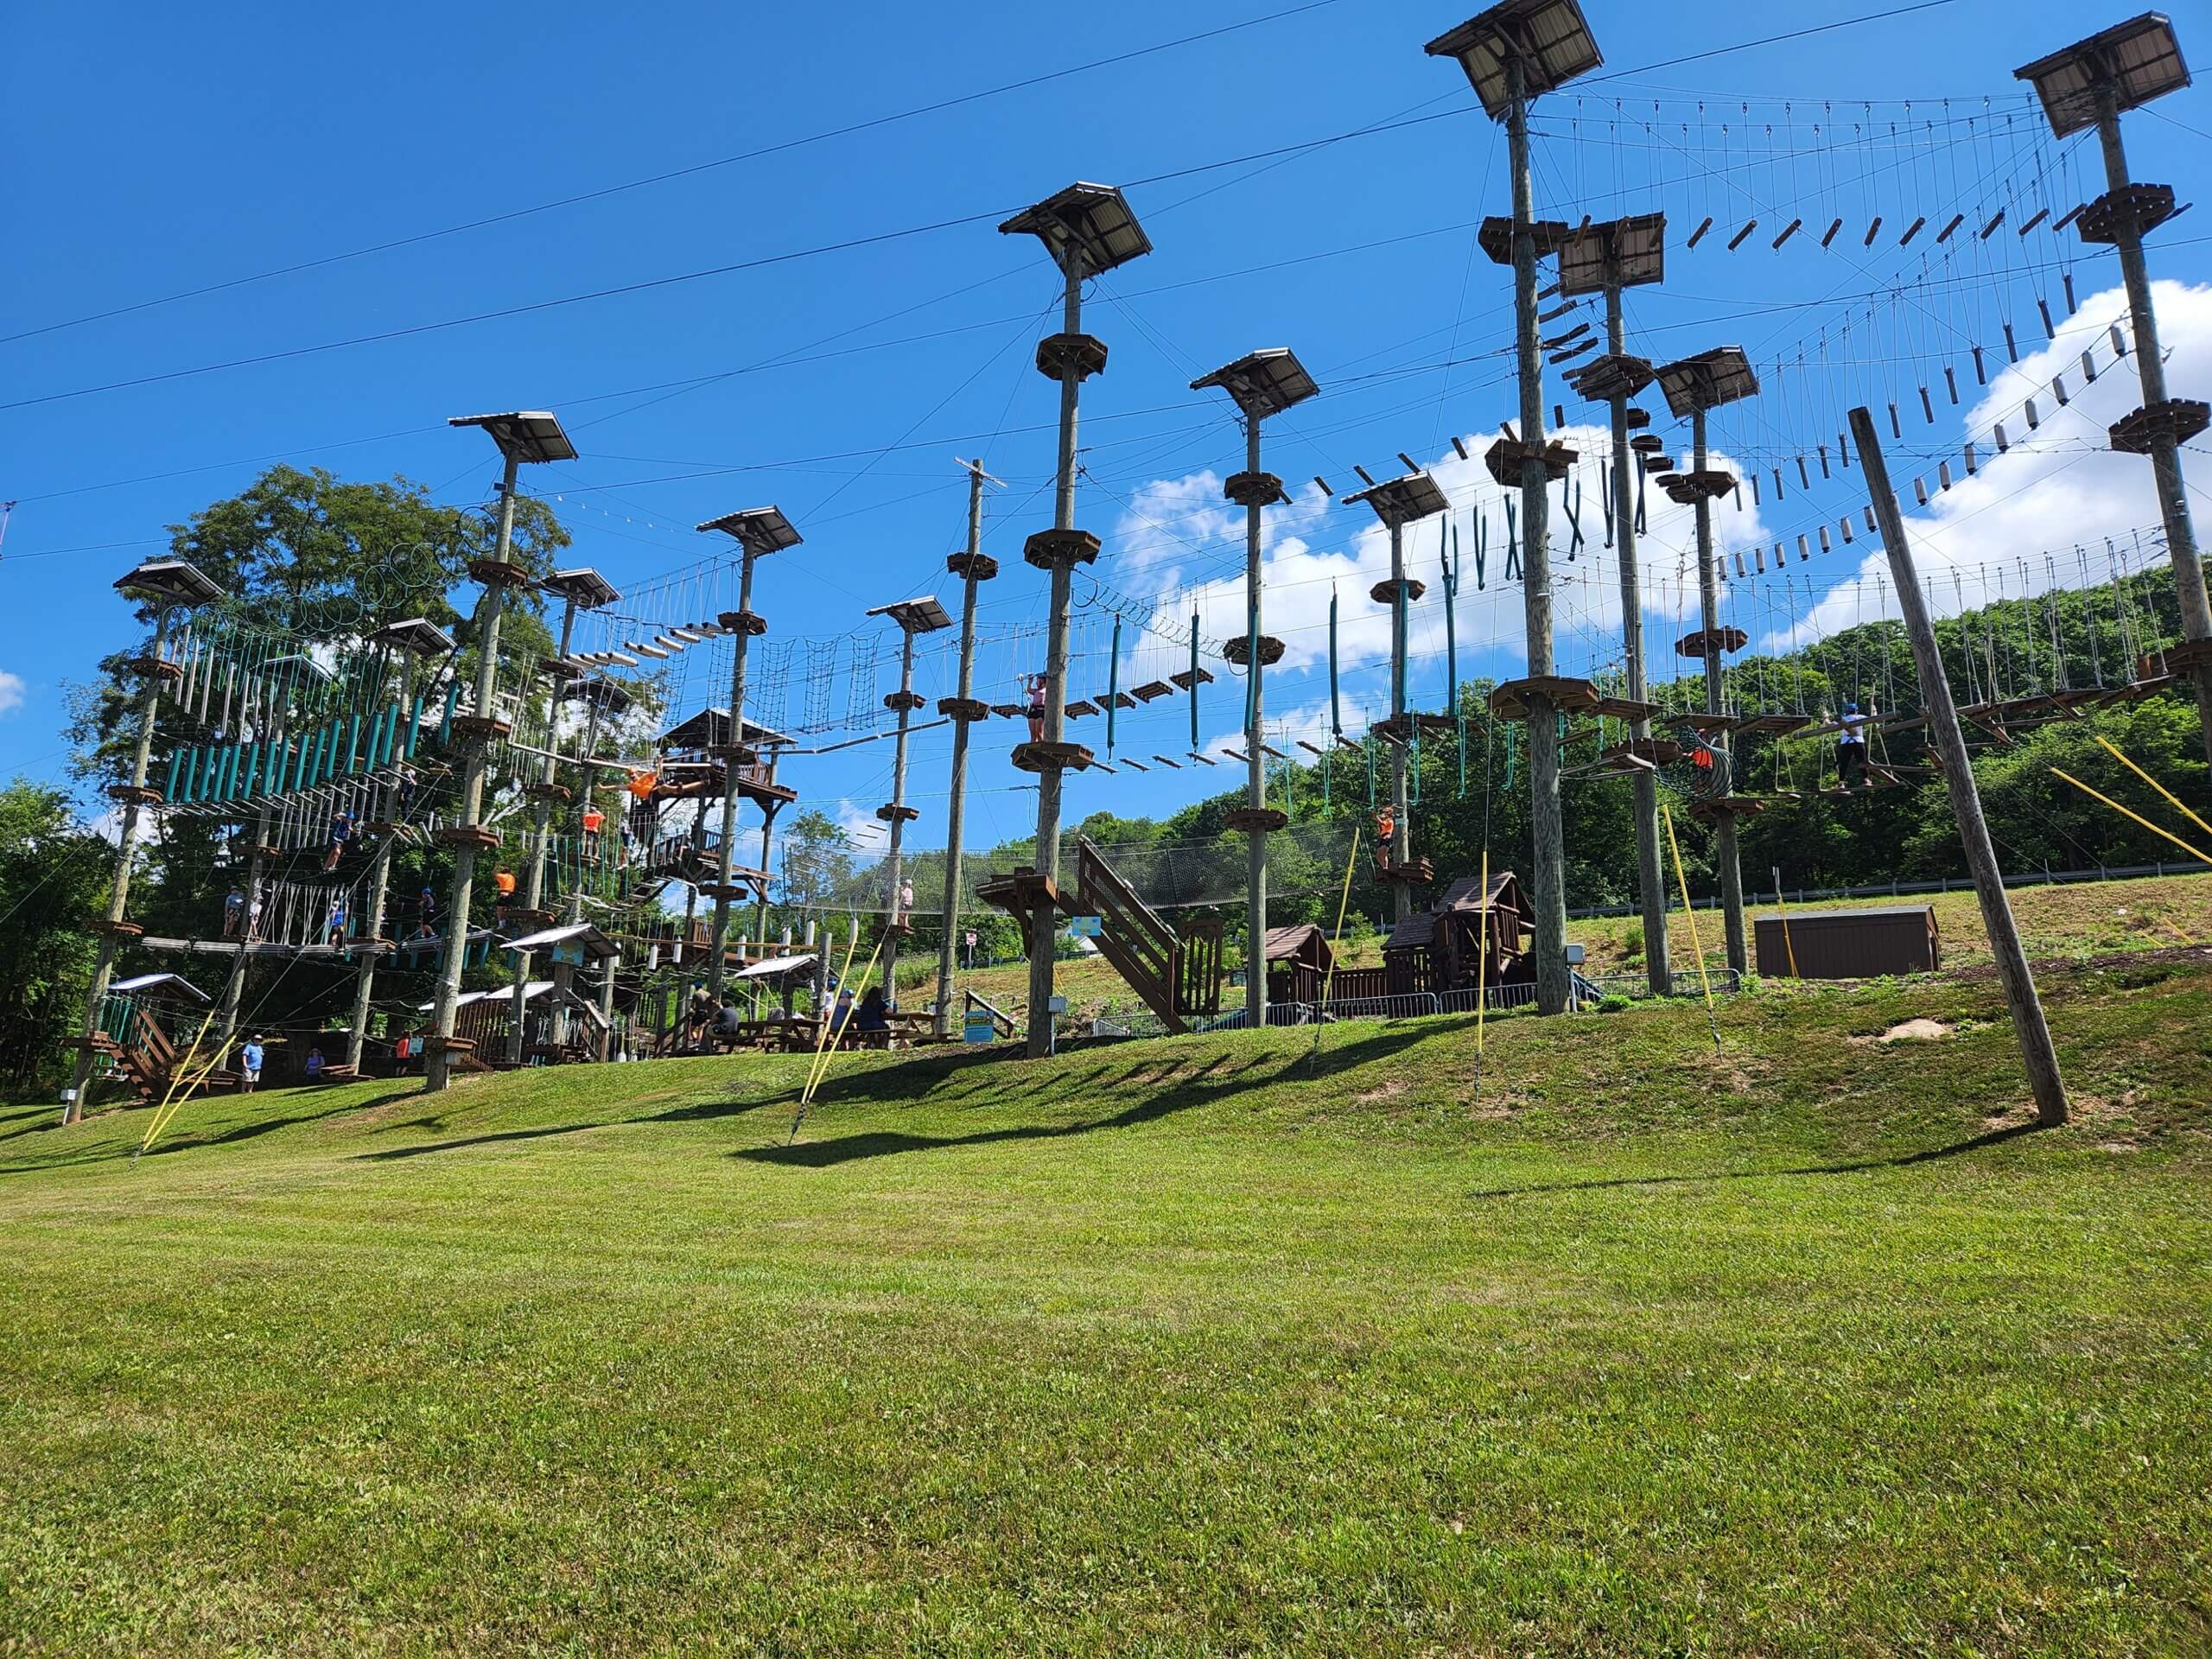 Wide-angle view of the Monkey Business Adventure Park.